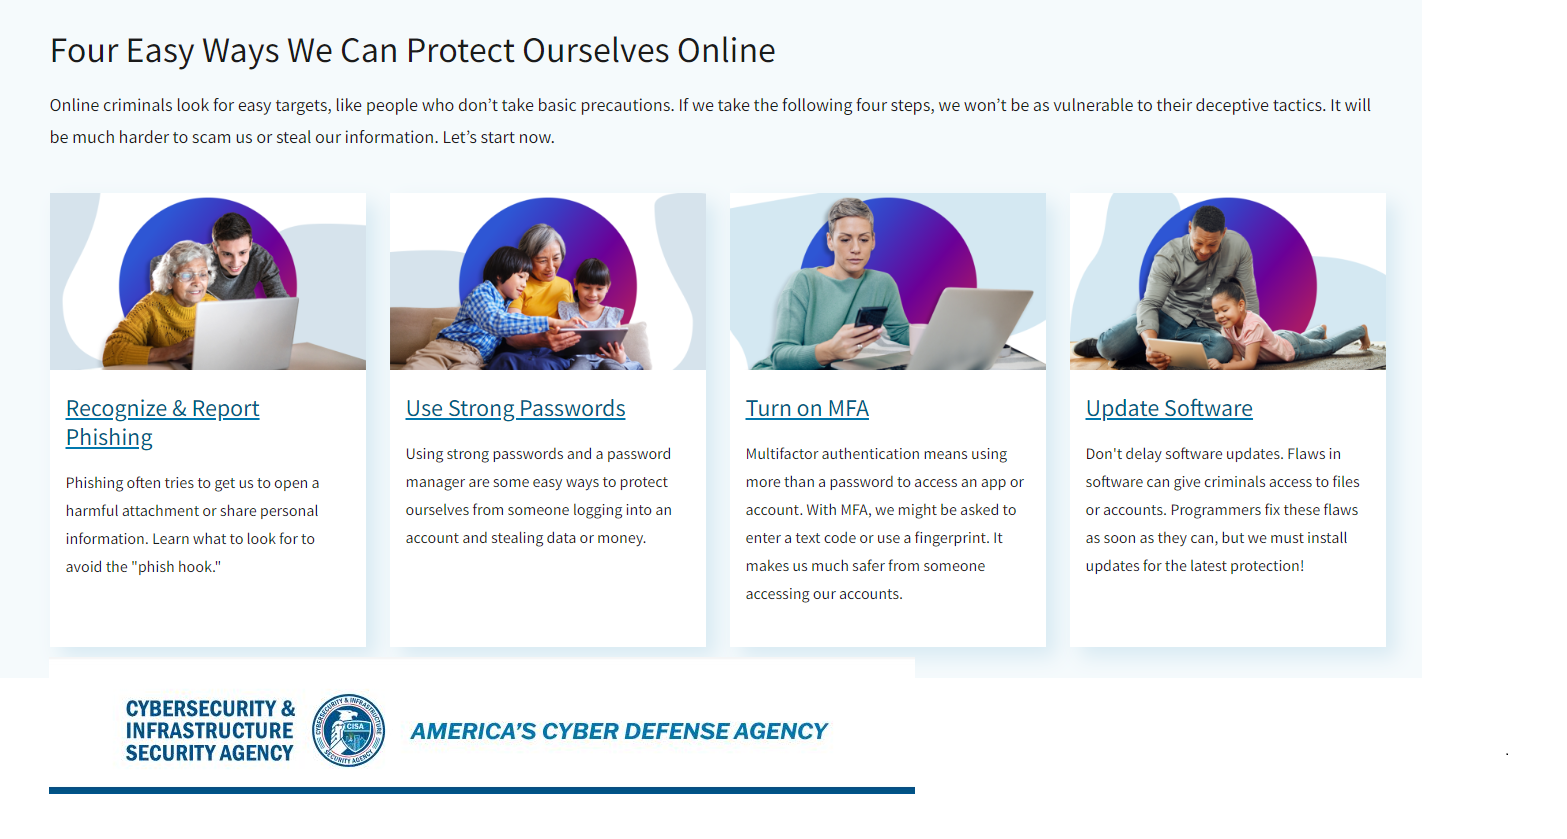 Four Easy Ways to Protect Yourself Online